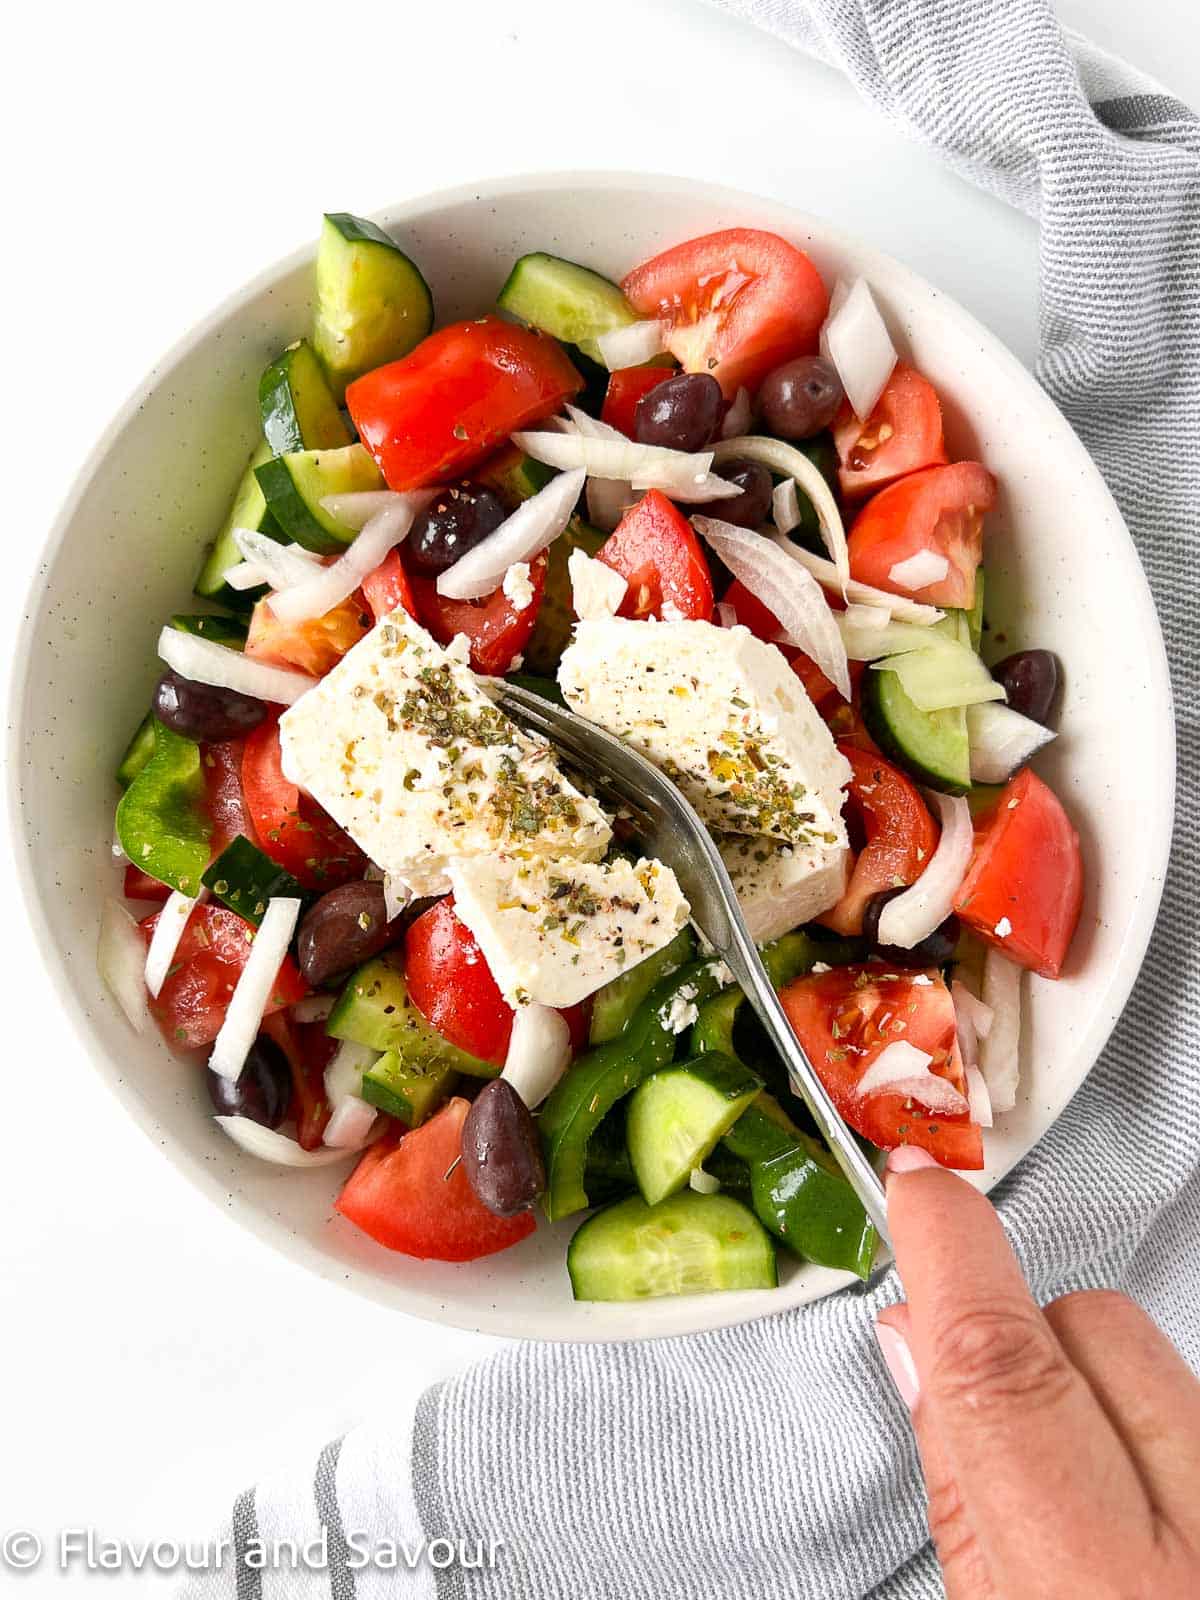 A Greek salad with a fork breaking apart a block of feta cheese on top.